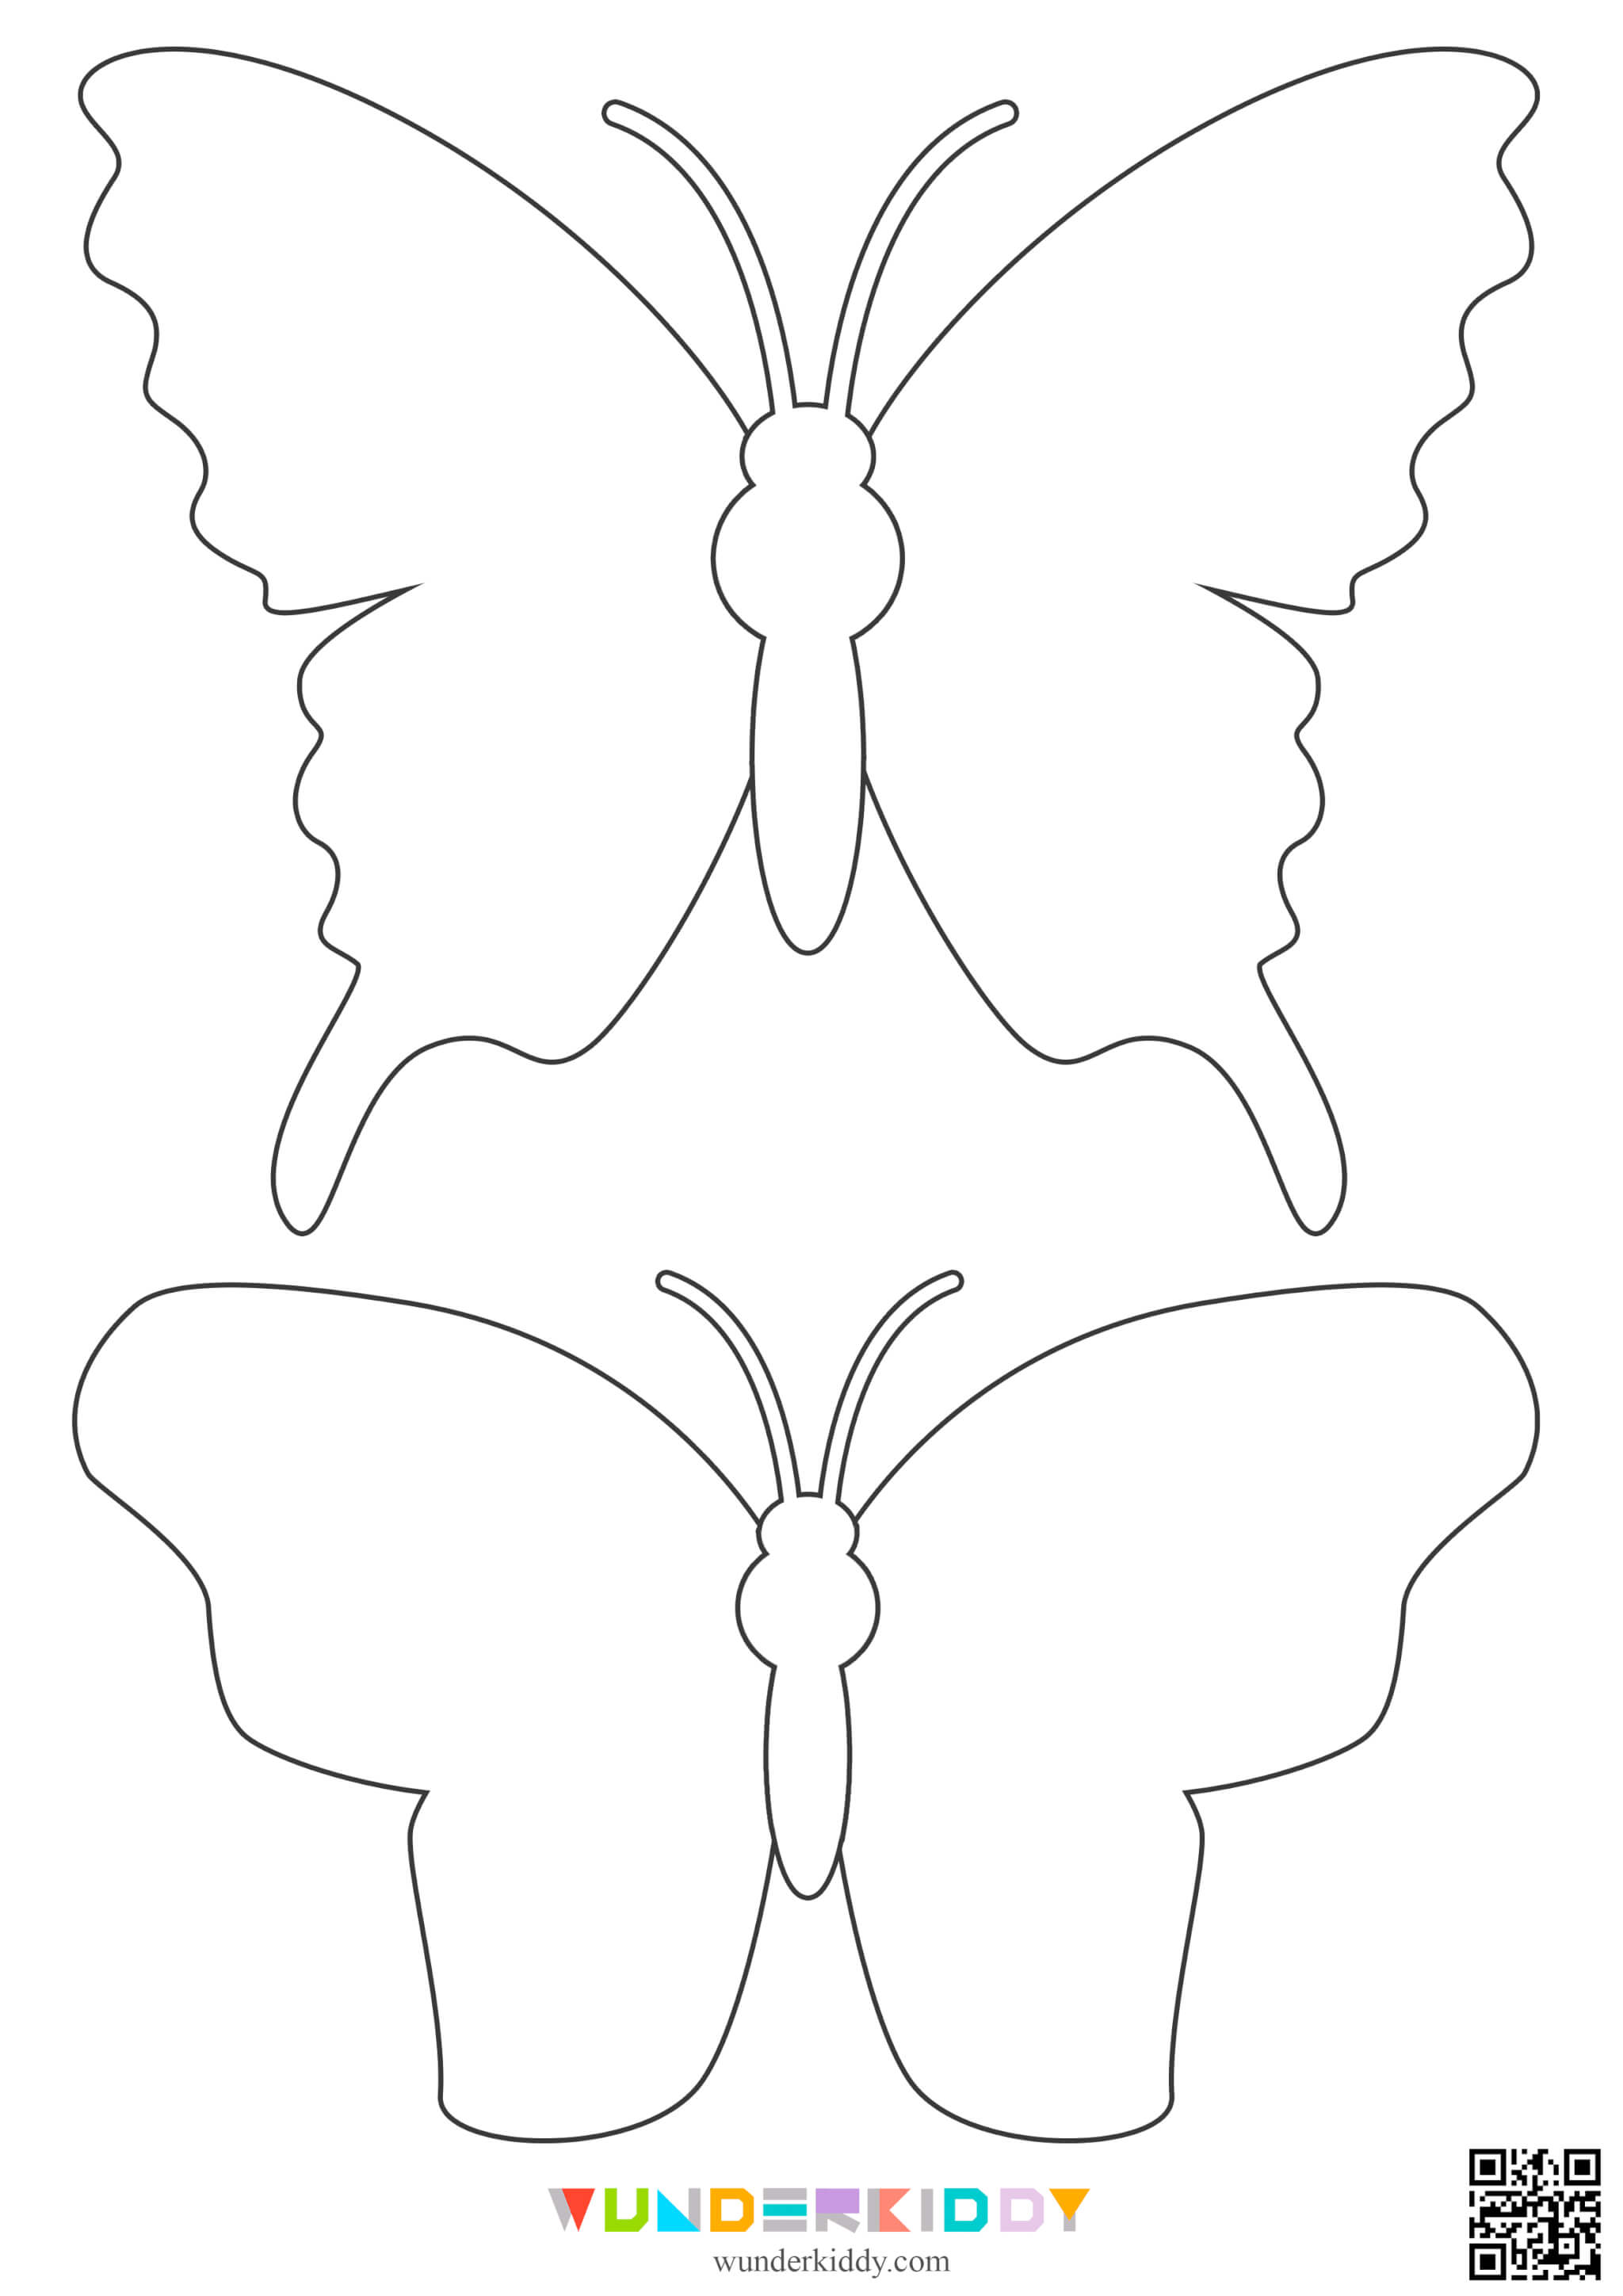 Free Printable Butterfly Templates - Image 9